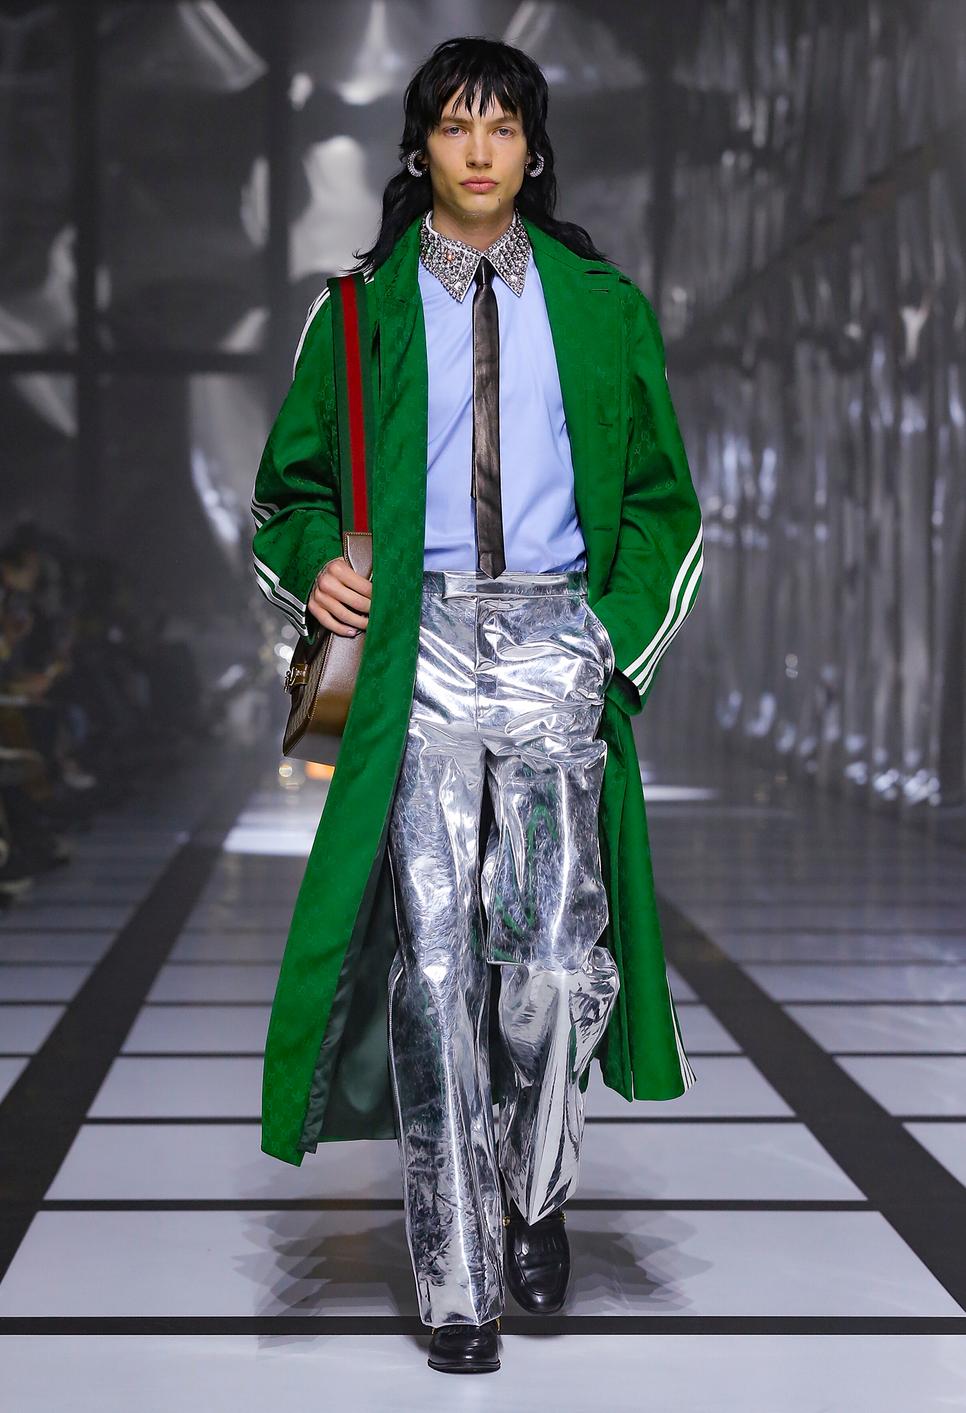 Gucci and Adidas' collaborative collection re-encoded fall fashion